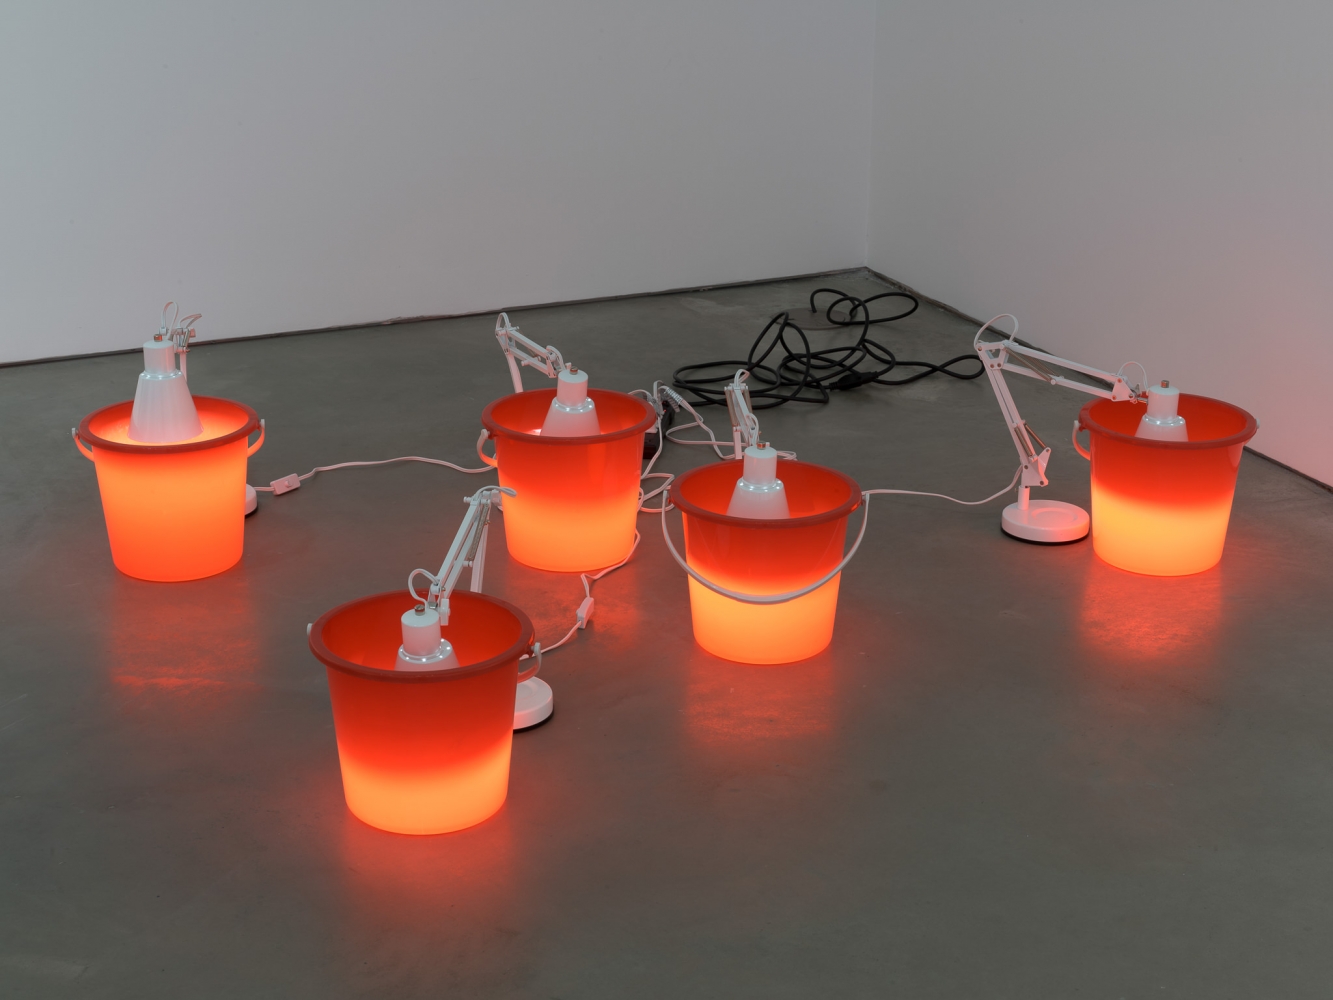 Dominique Gonzalez-Foerster

Untitled

1987/2015

Plastic red buckets and white architect lamps

Dimensions variable

Variation&amp;nbsp;of 3

DGF 188

&amp;nbsp;

INQUIRE